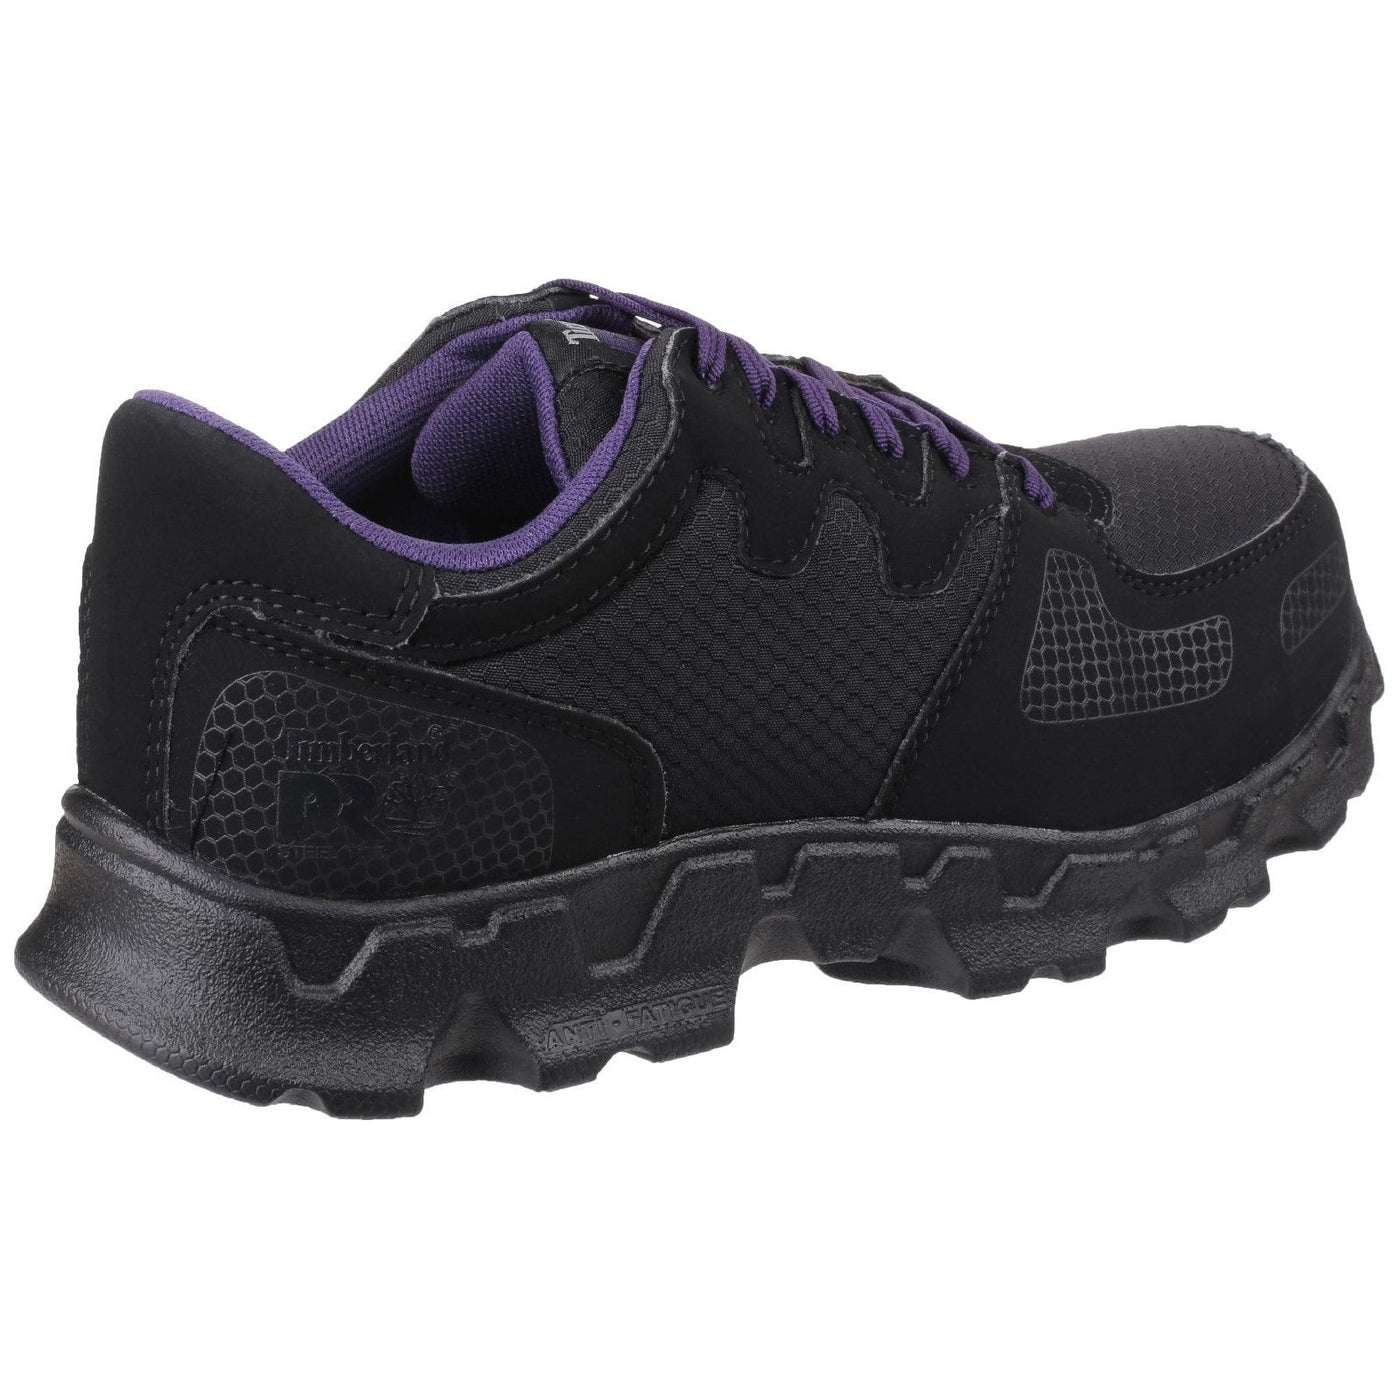 Timberland Powertrain Safety Shoes - Womens